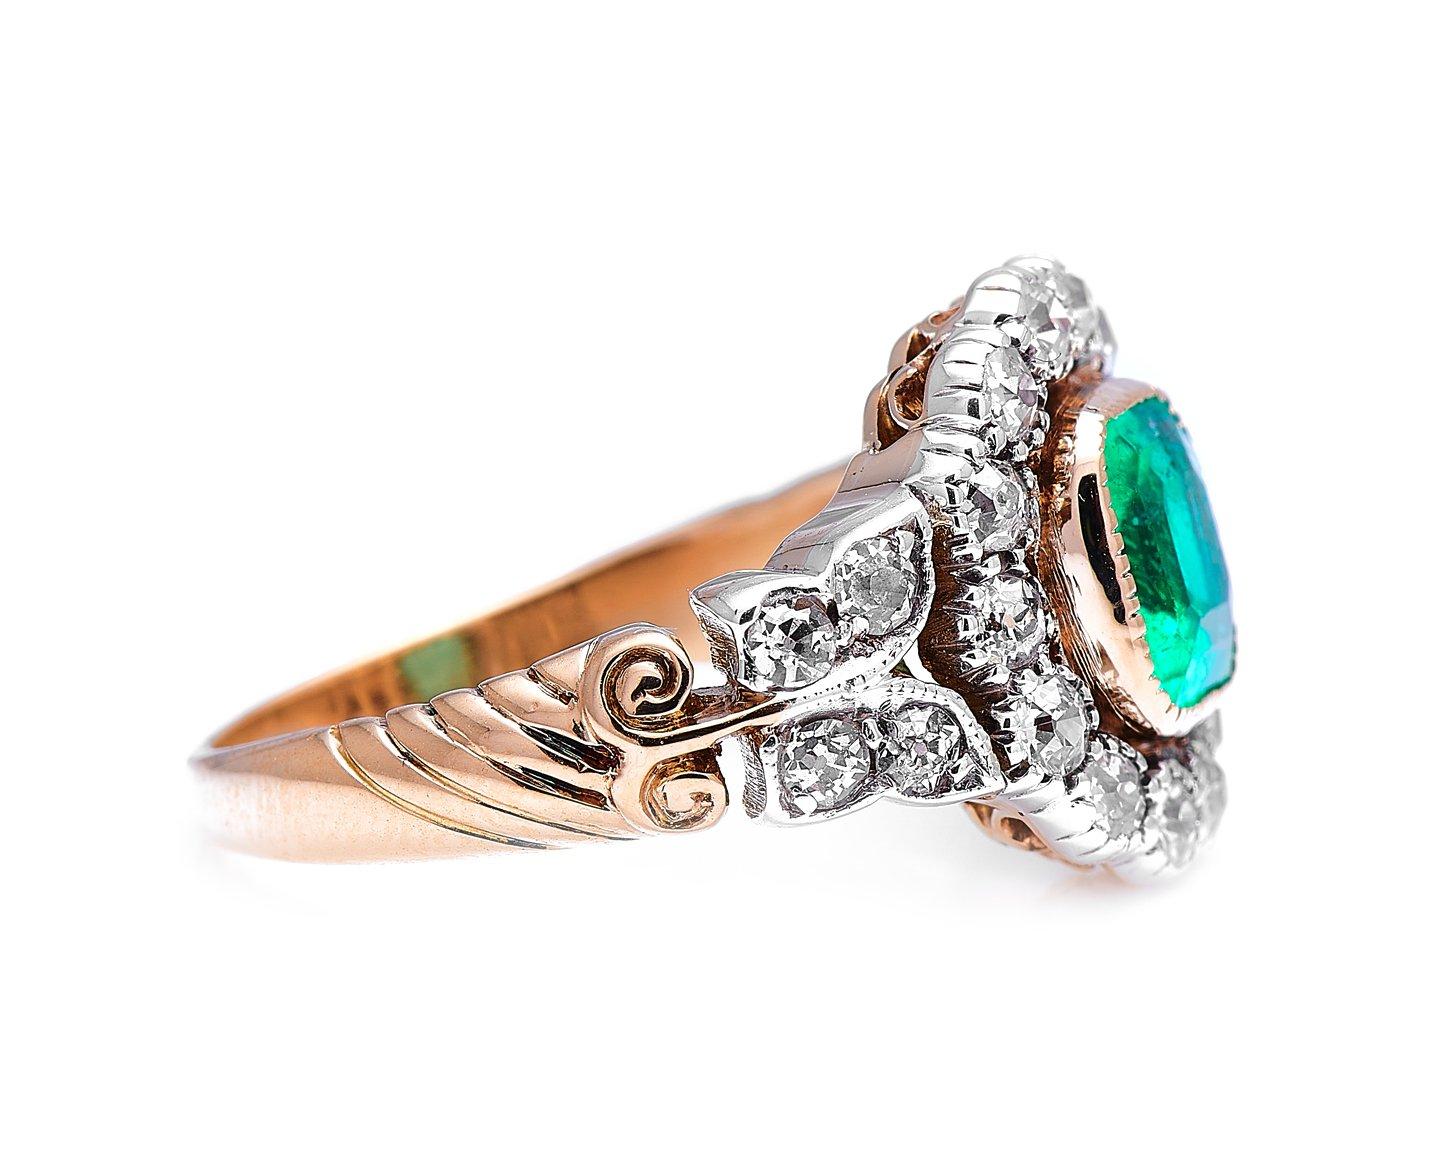 Antique Cushion Cut Antique, Edwardian, 18 Carat Gold, Garland Style, Emerald and Diamond Ring